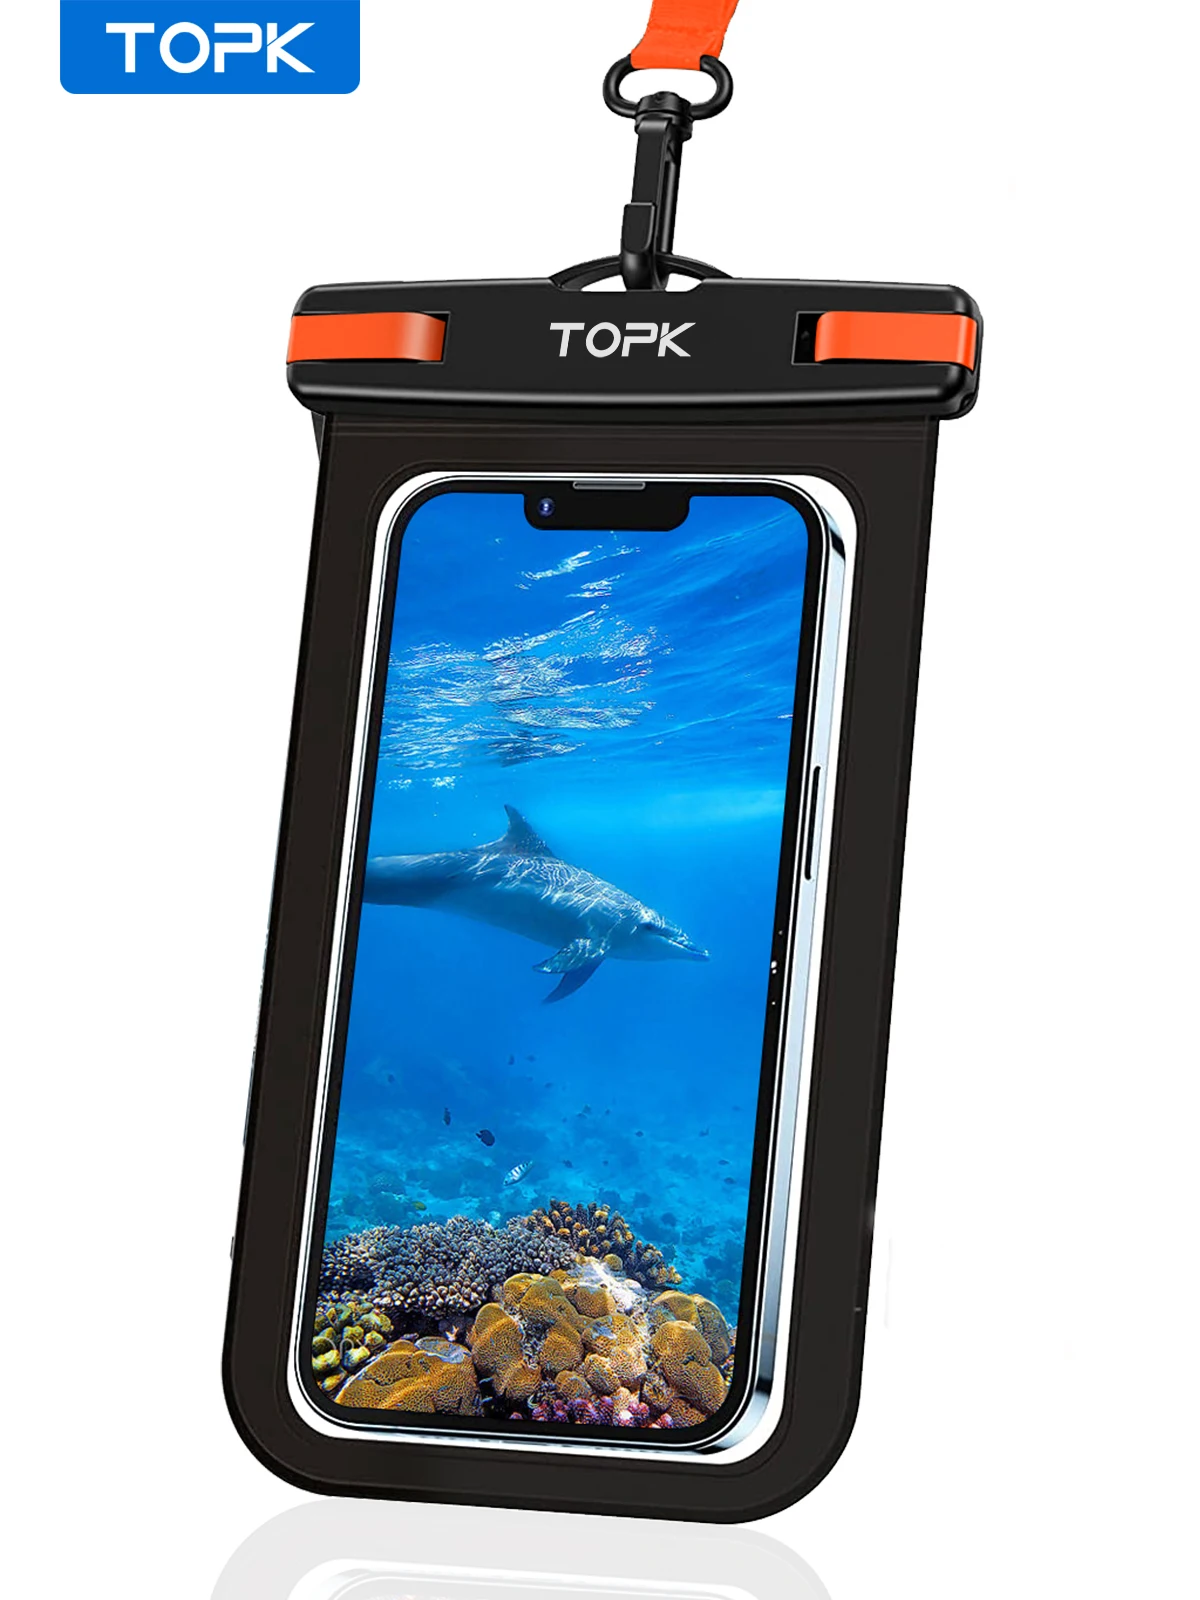 TOPK E01 Waterproof Phone Pouch,Universal IPX8 Waterproof Phone Case Dry Bag with Lanyard for iPhone Samsung Up to 7.0 inch